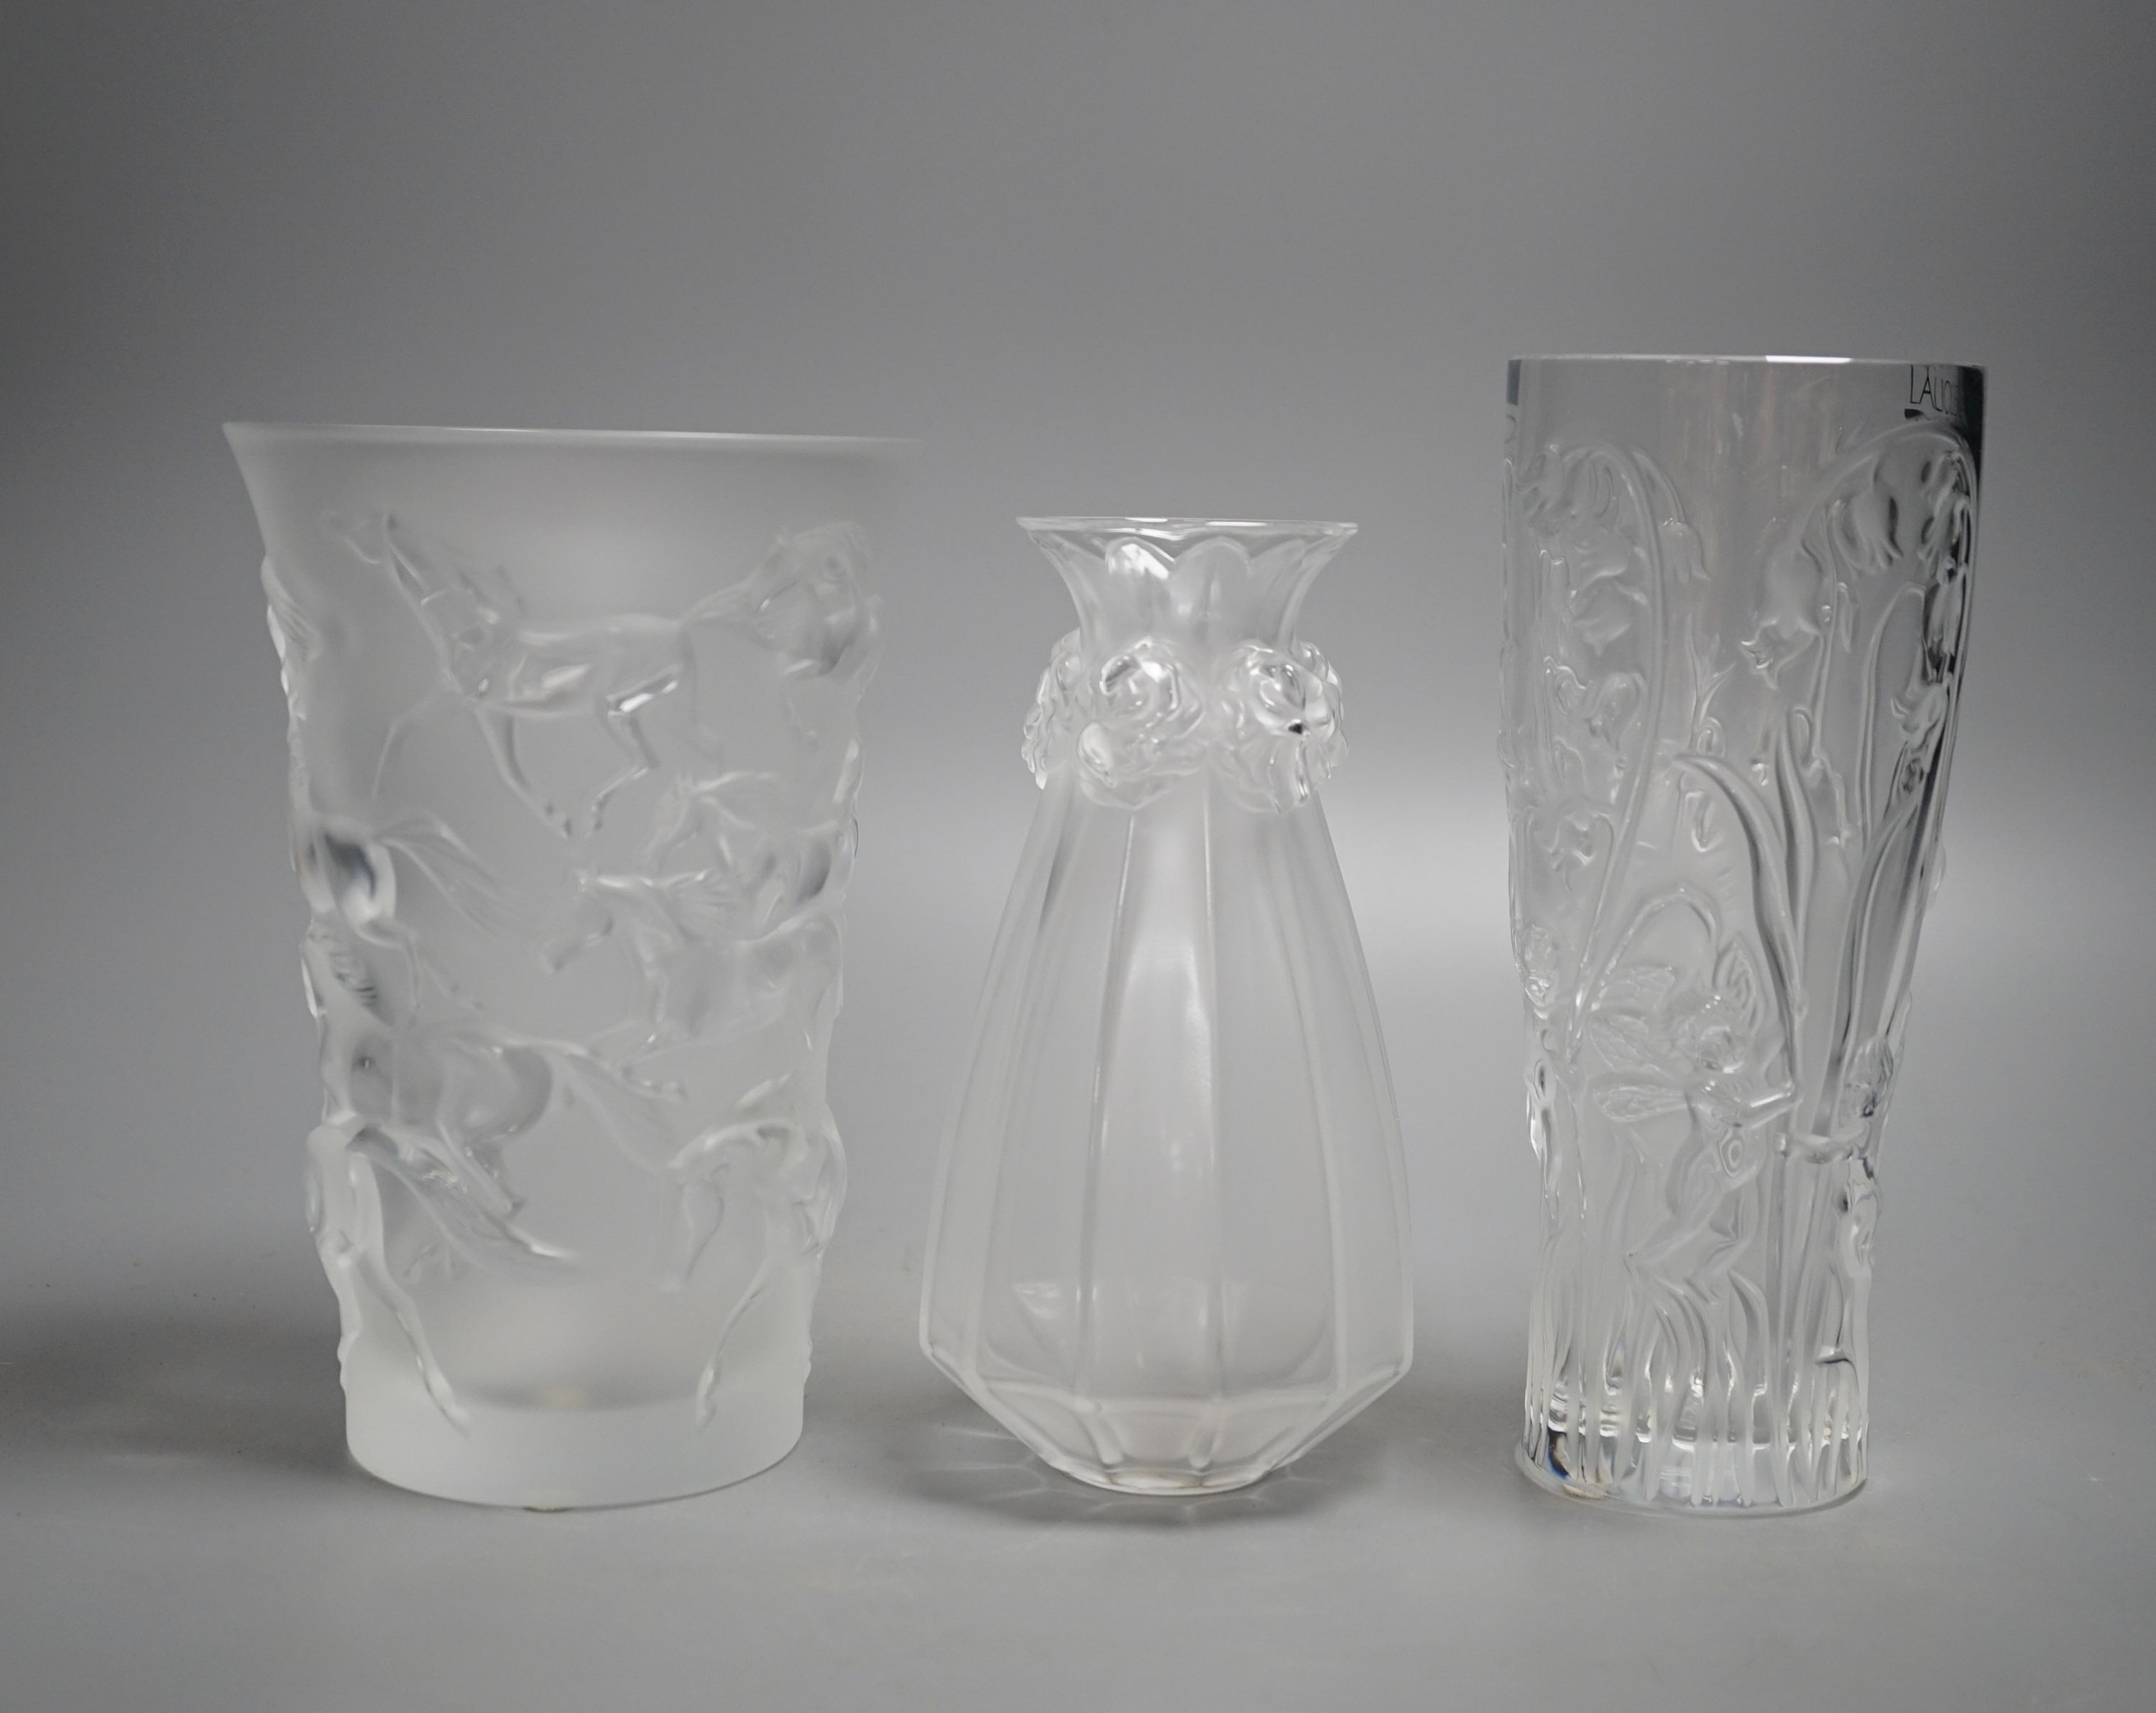 Three modern Lalique frosted glass vases - Oeillets (Carnations), Mustang and Elves pattern, tallest 20cm